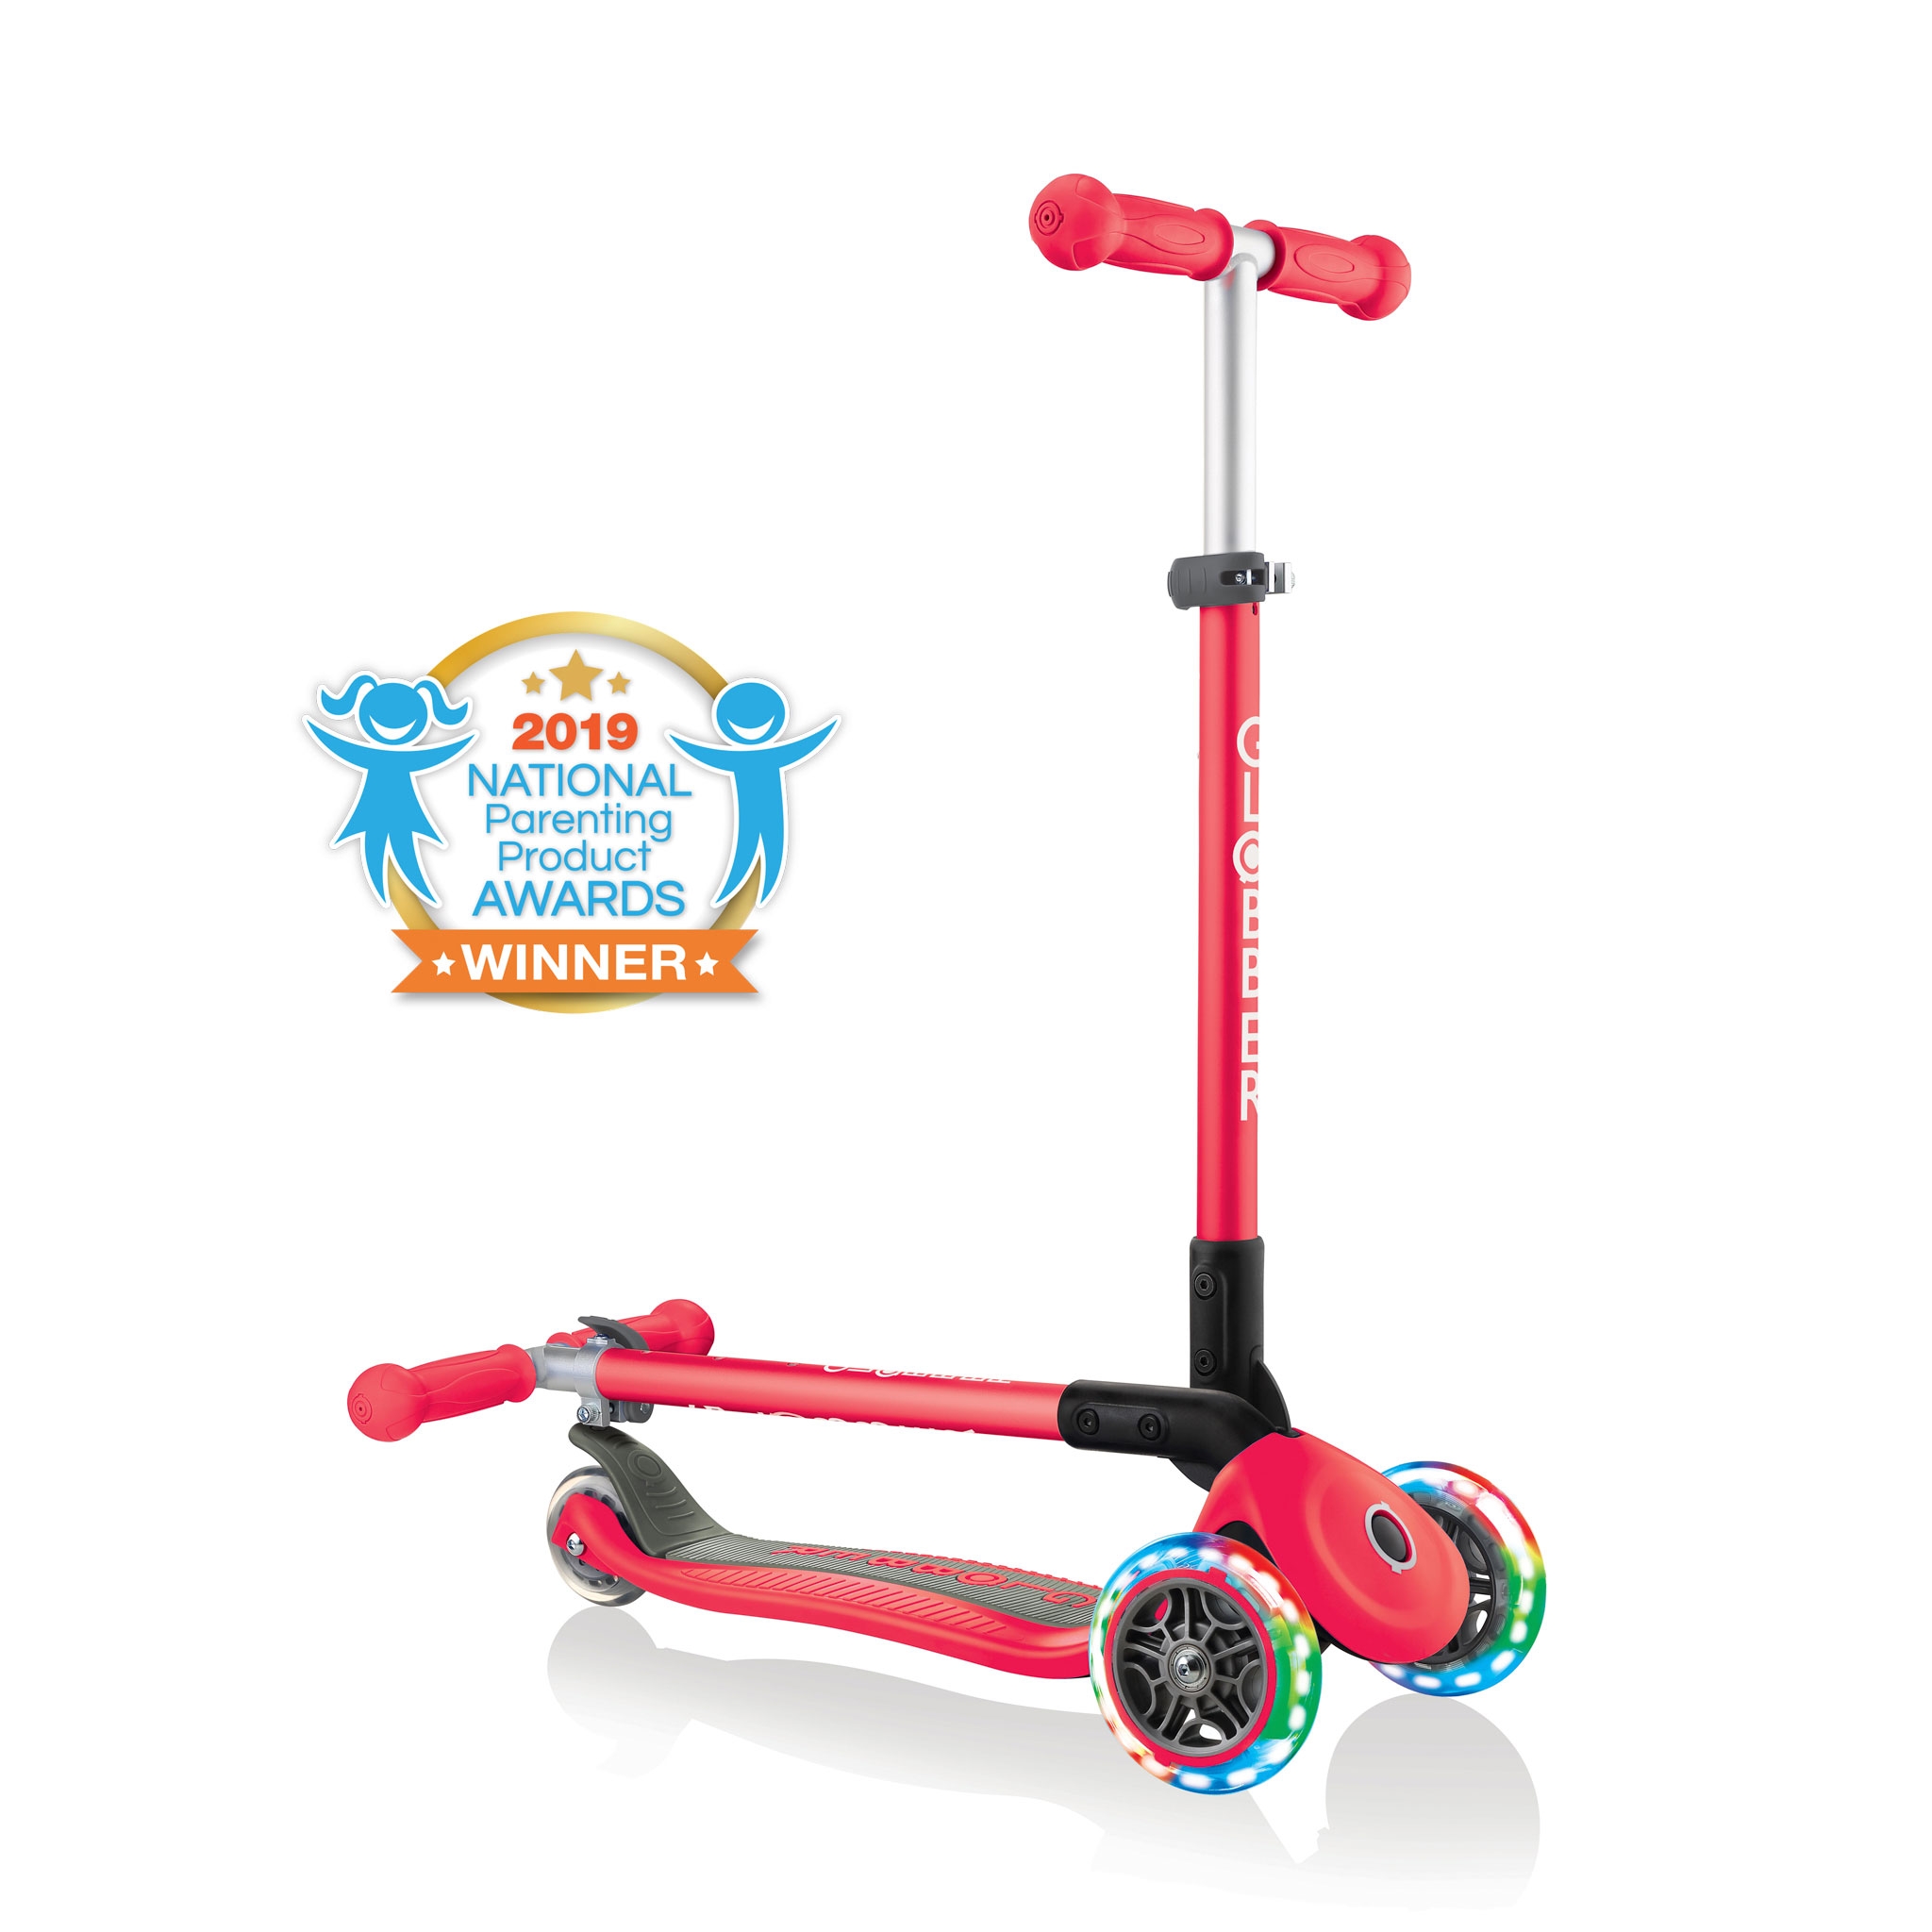 PRIMO-FOLDABLE-LIGHTS-3-wheel-fold-up-scooter-for-kids-new-red2 0